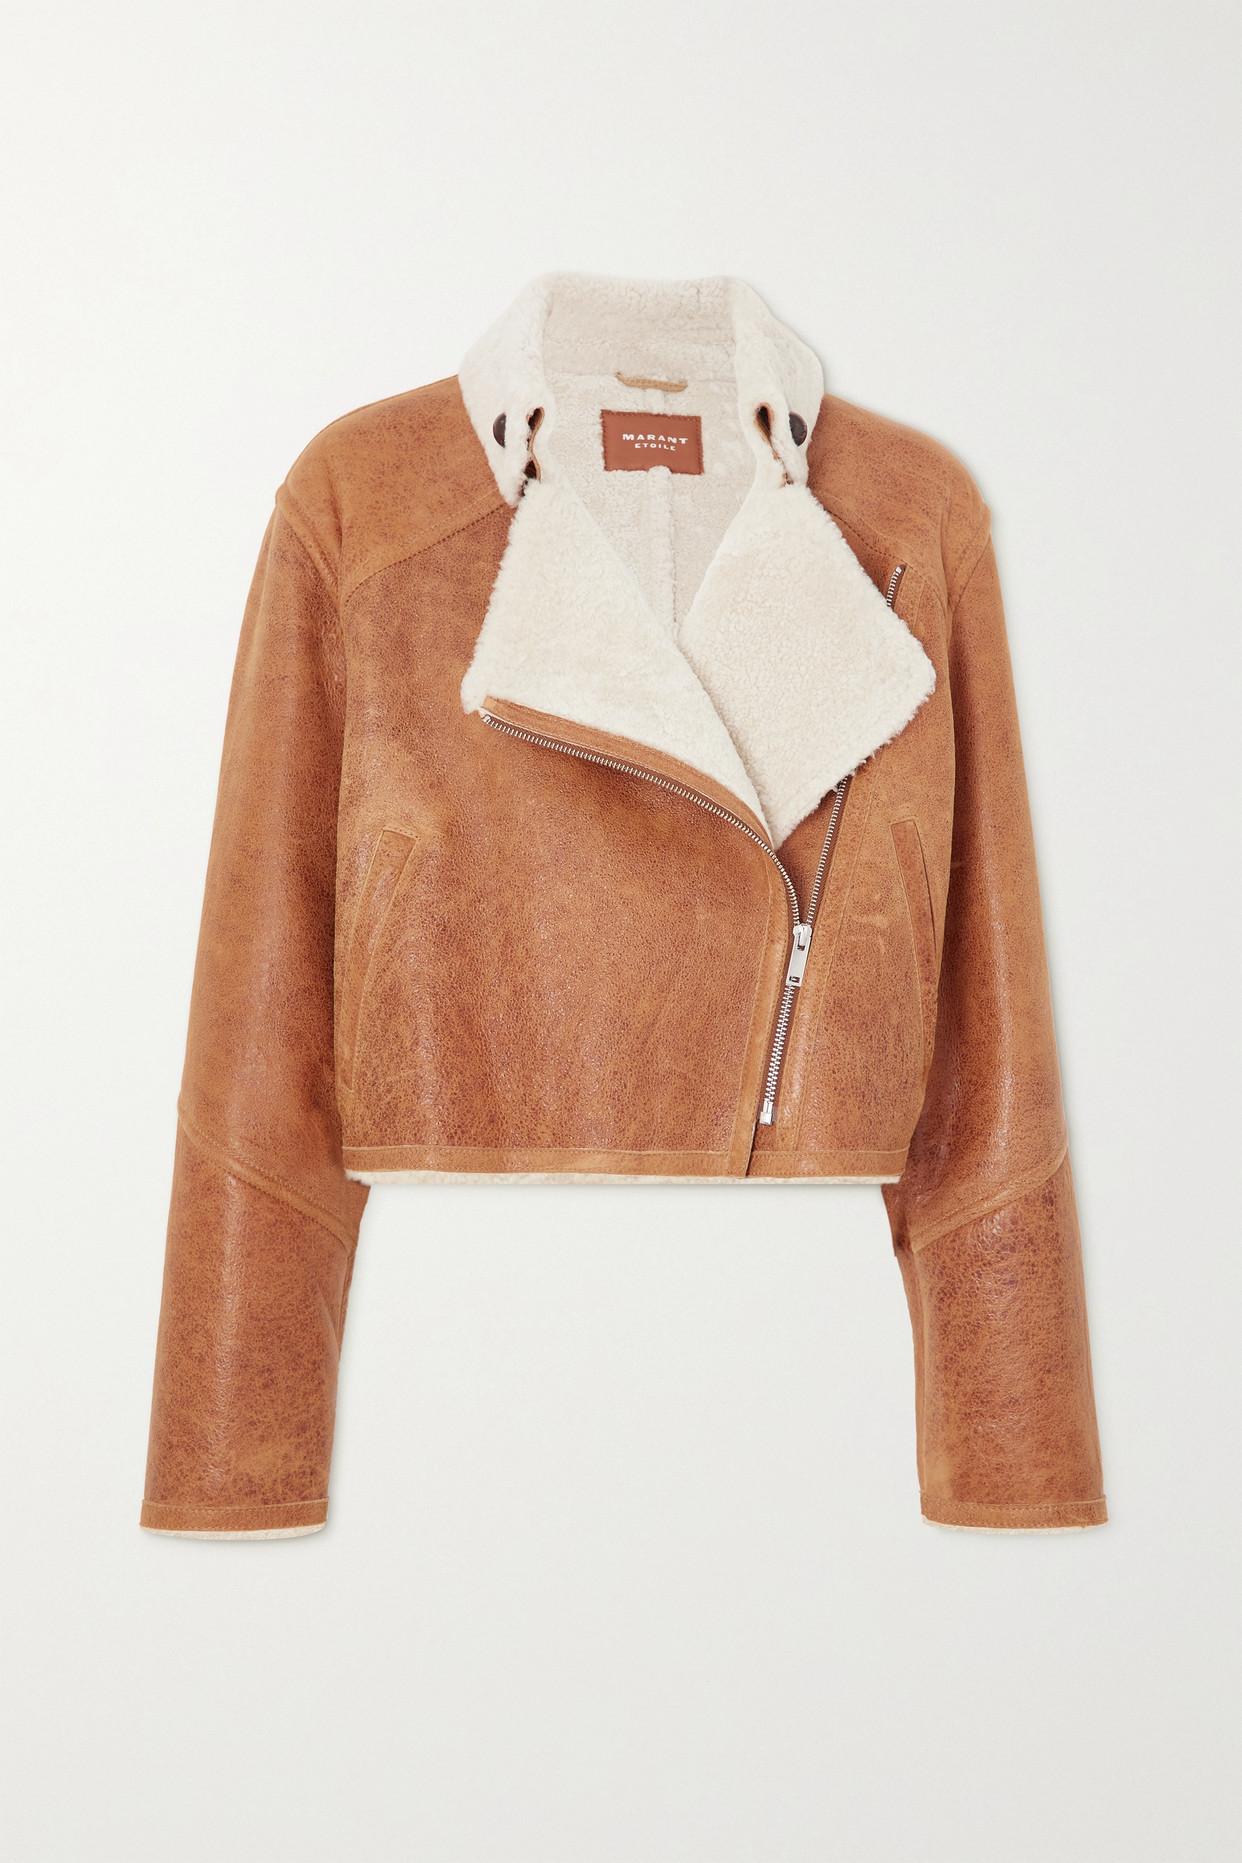 Étoile Isabel Marant Apstya Cropped Shearling Jacket in White | Lyst